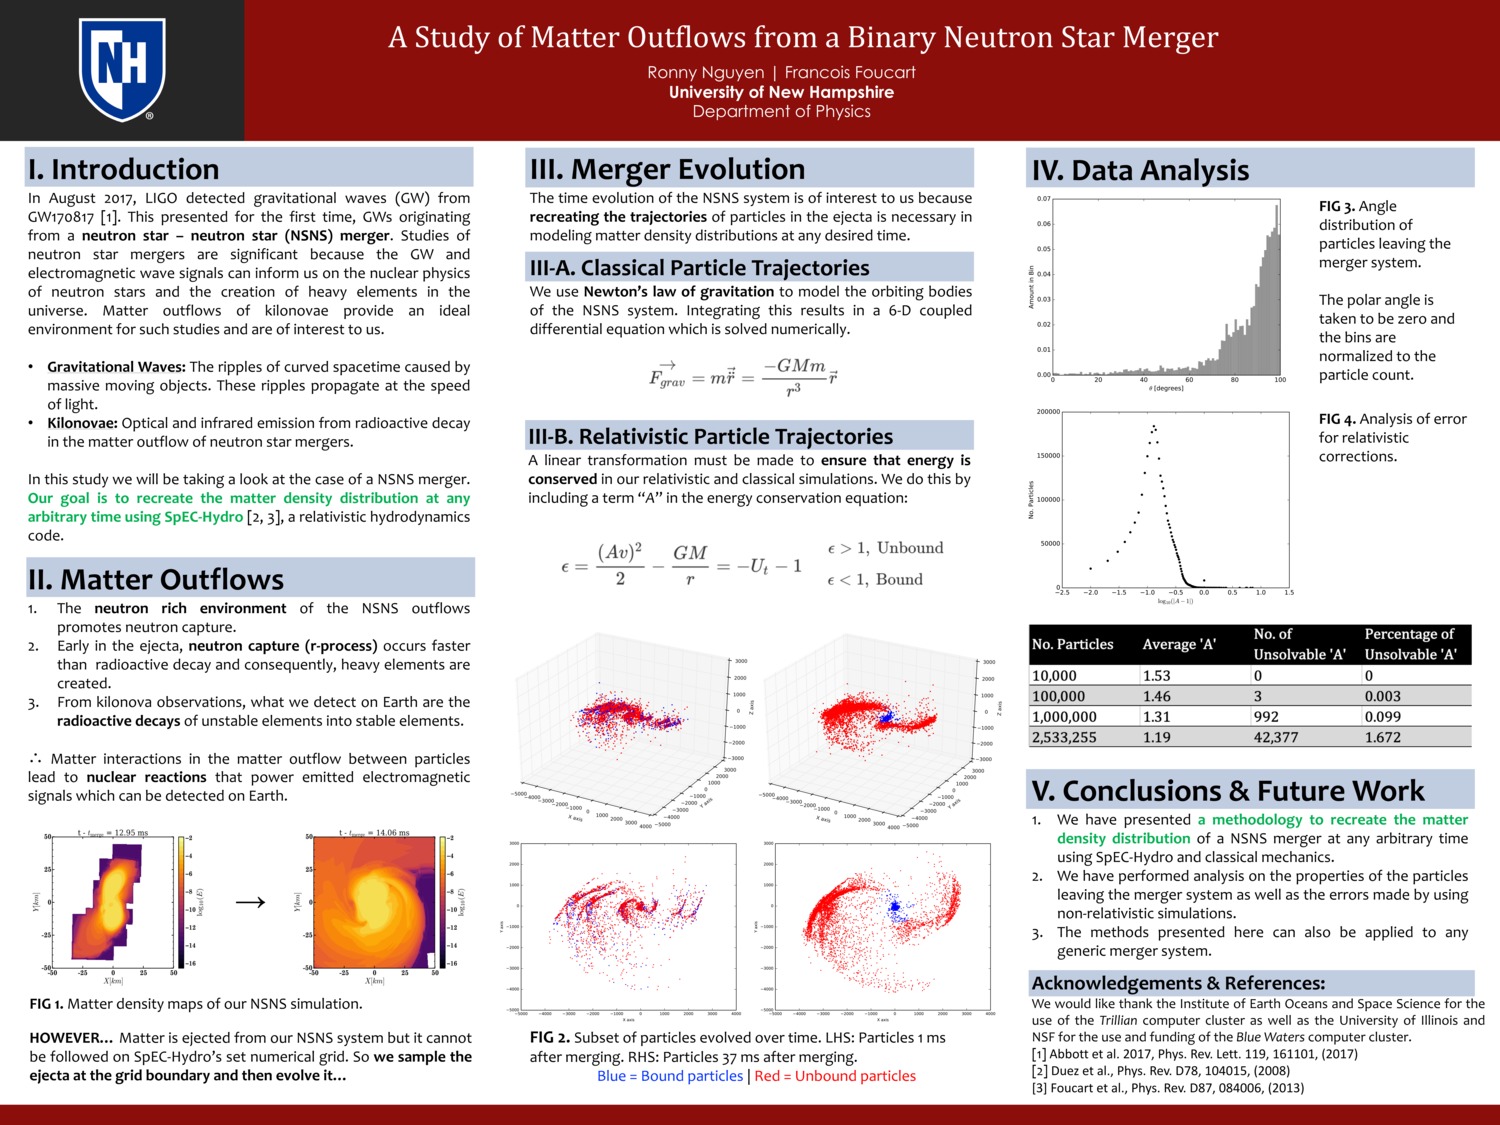 A Study Of Matter Outflows From A Binary Neutron Star Merger by rn1007